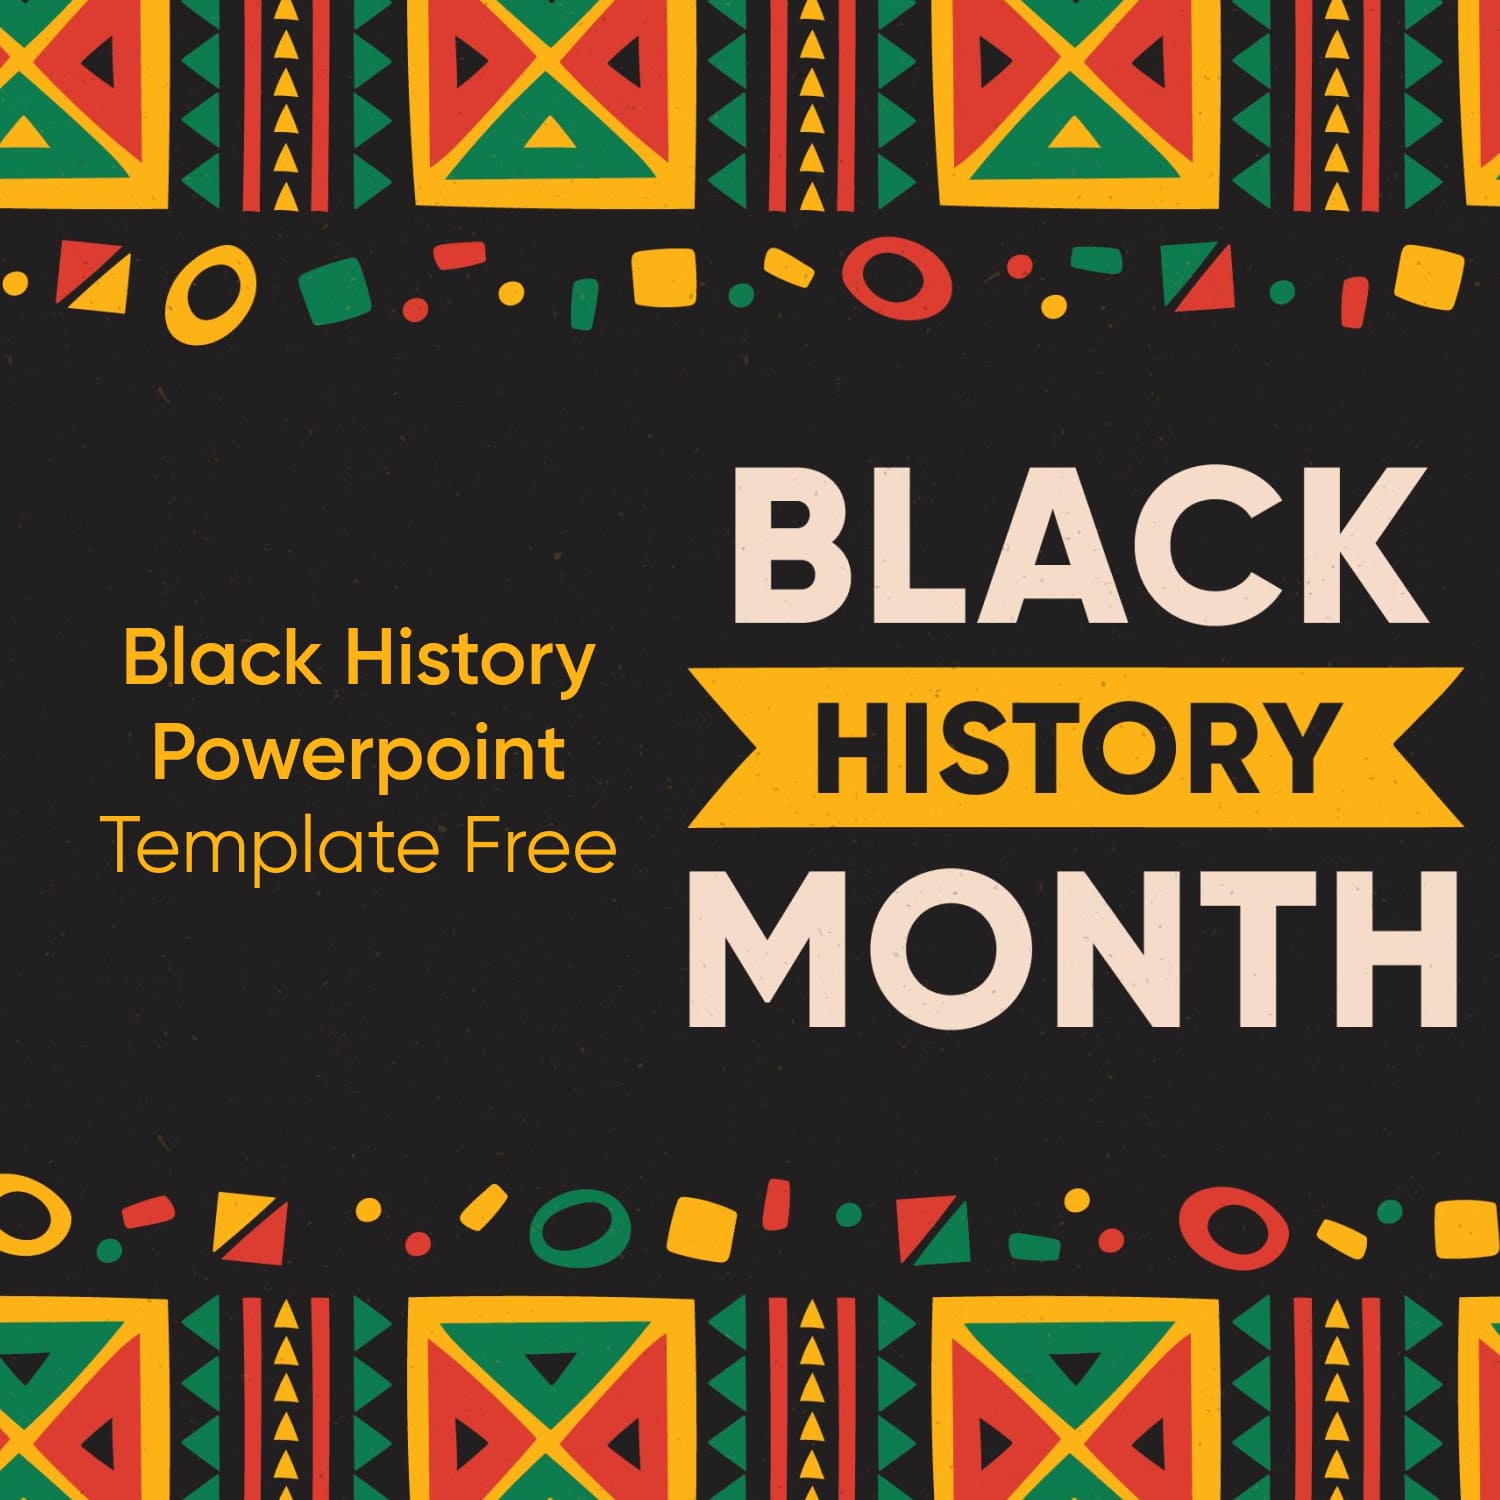 Black History Month Ppt Template